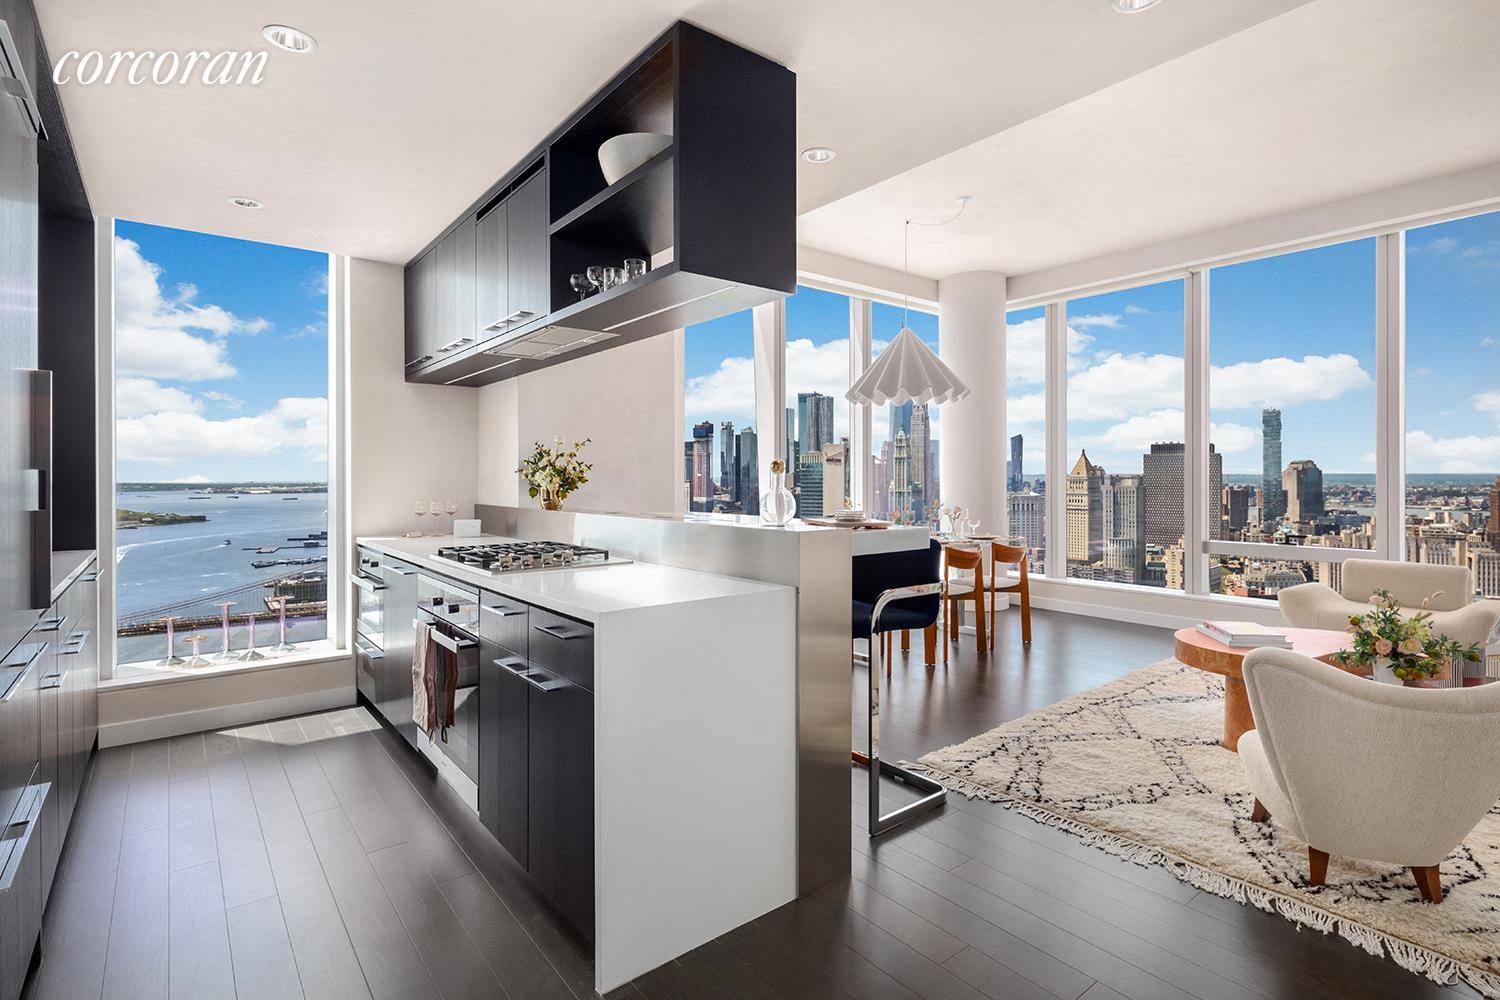 ONE MANHATTAN SQUARE OFFERS ONE OF THE LAST 20 YEAR TAX ABATEMENTS AVAILABLE IN NEW YORK CITY Residence 64A is a 1, 667 square foot three bedroom, three bathroom with ...